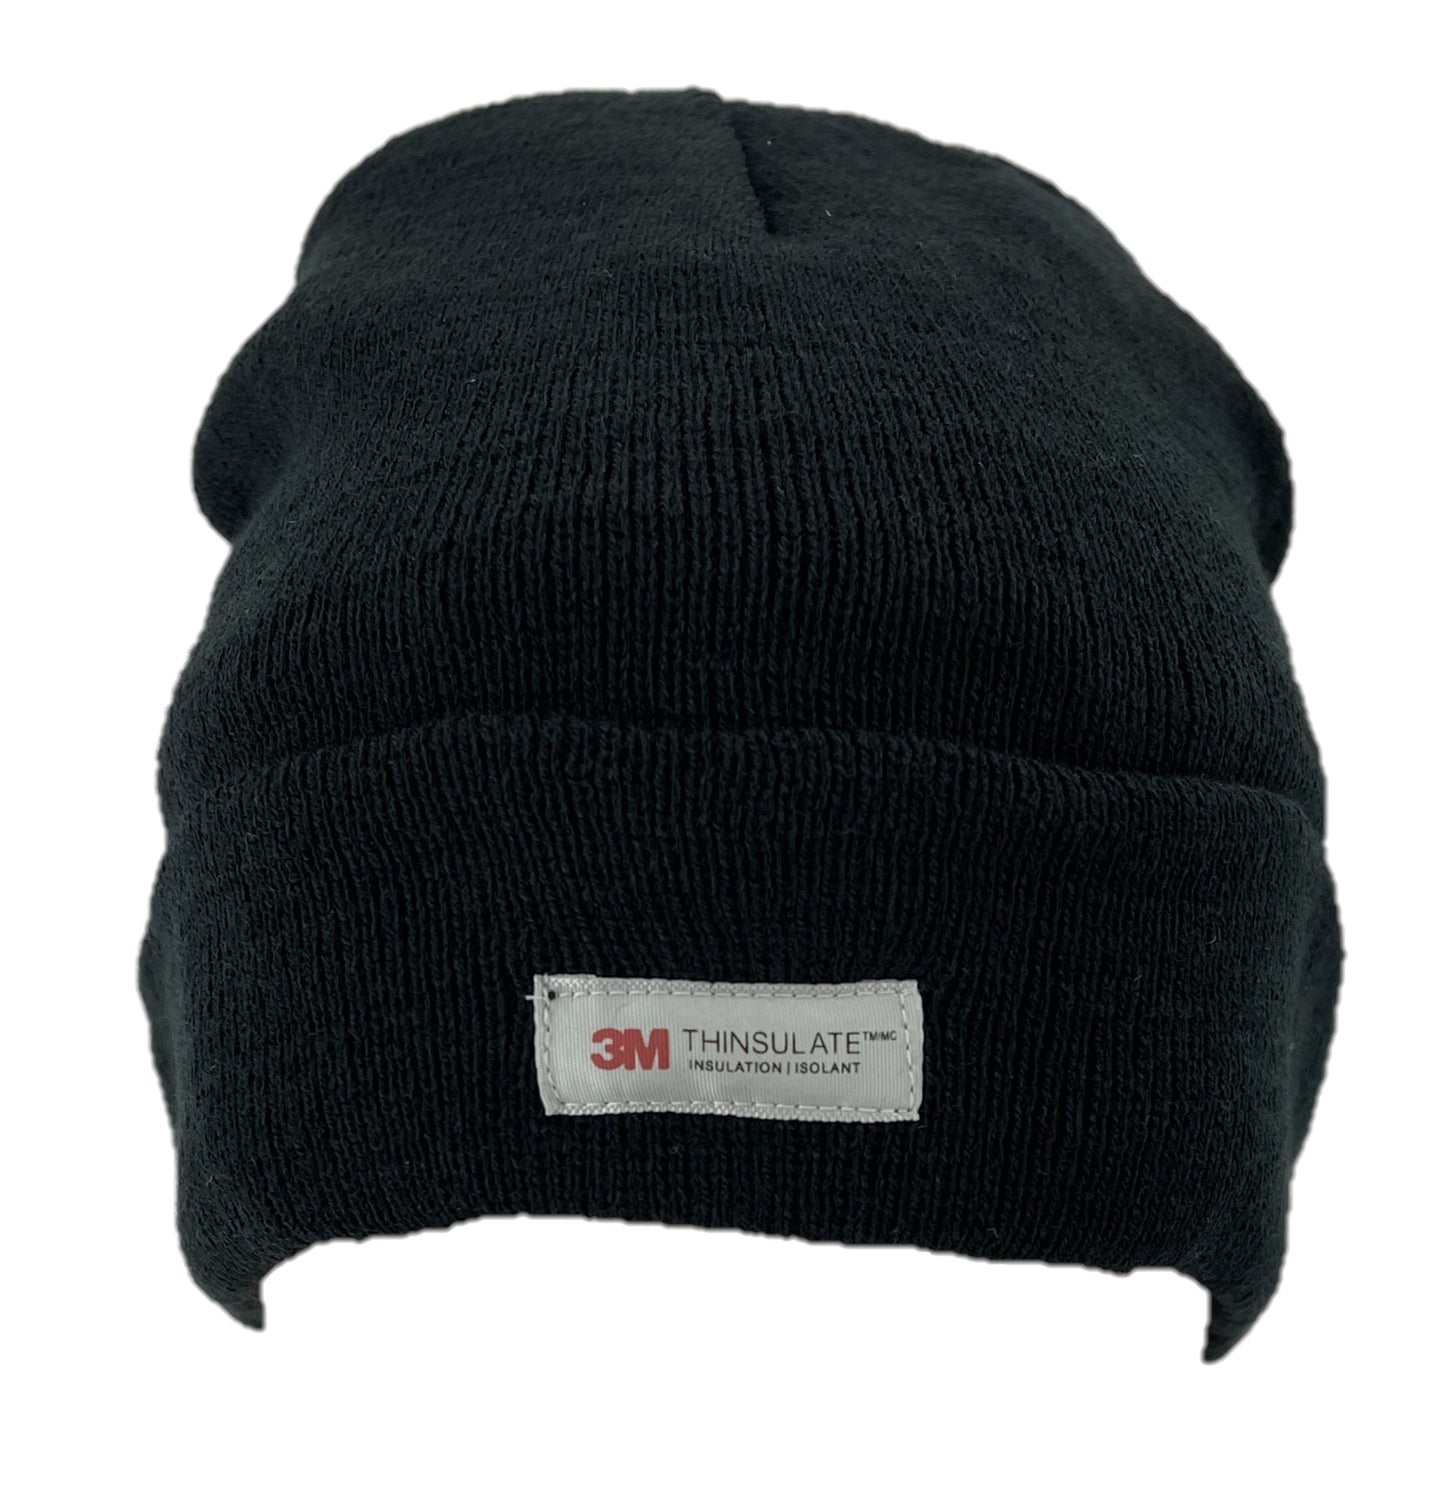 Mens 3M Thinsulate Thermal Winter Hat - Choose Either Grey or Black